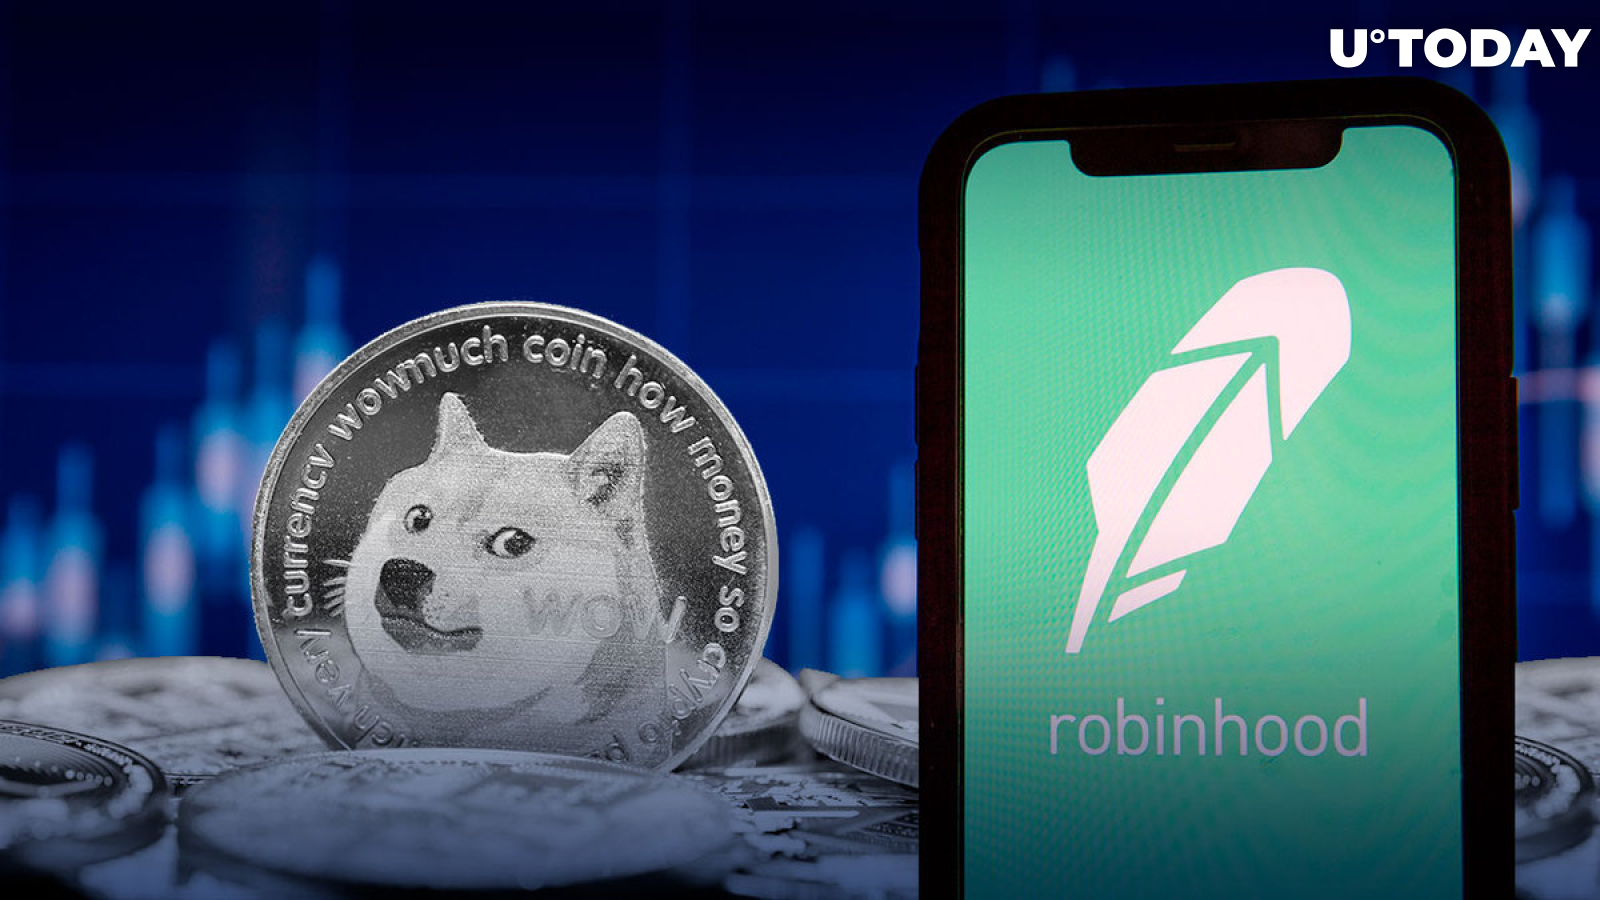 Robinhood Now Holds 24% of All Dogecoins (DOGE), Dominating Dogecoin Network